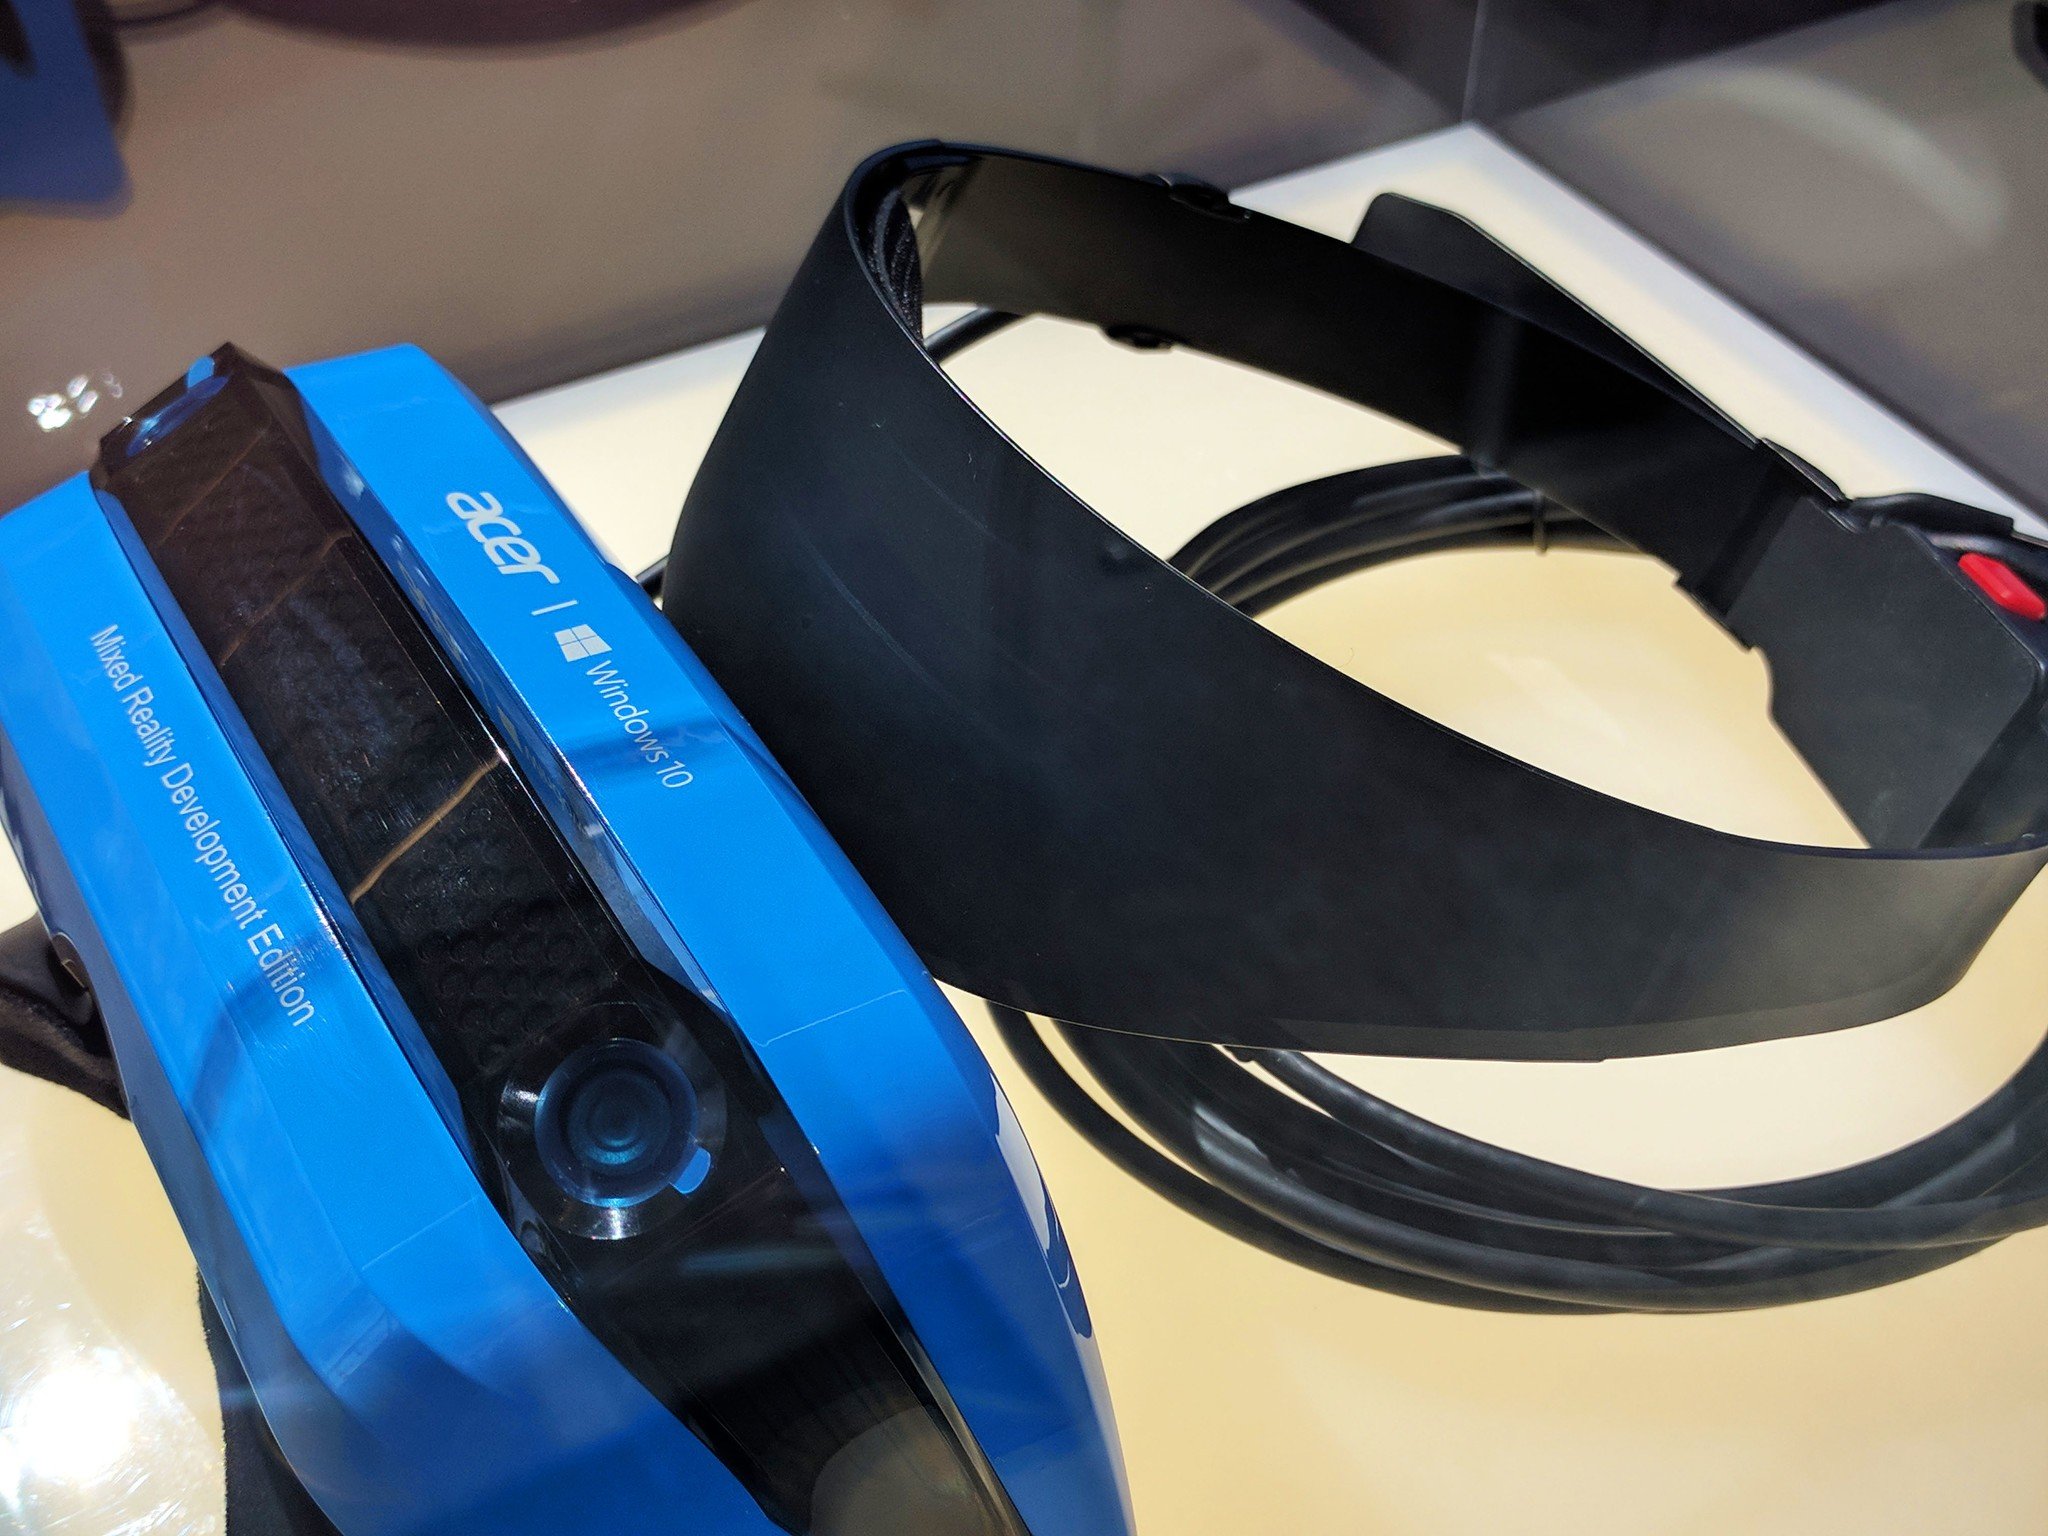 Acer Mixed Reality headset